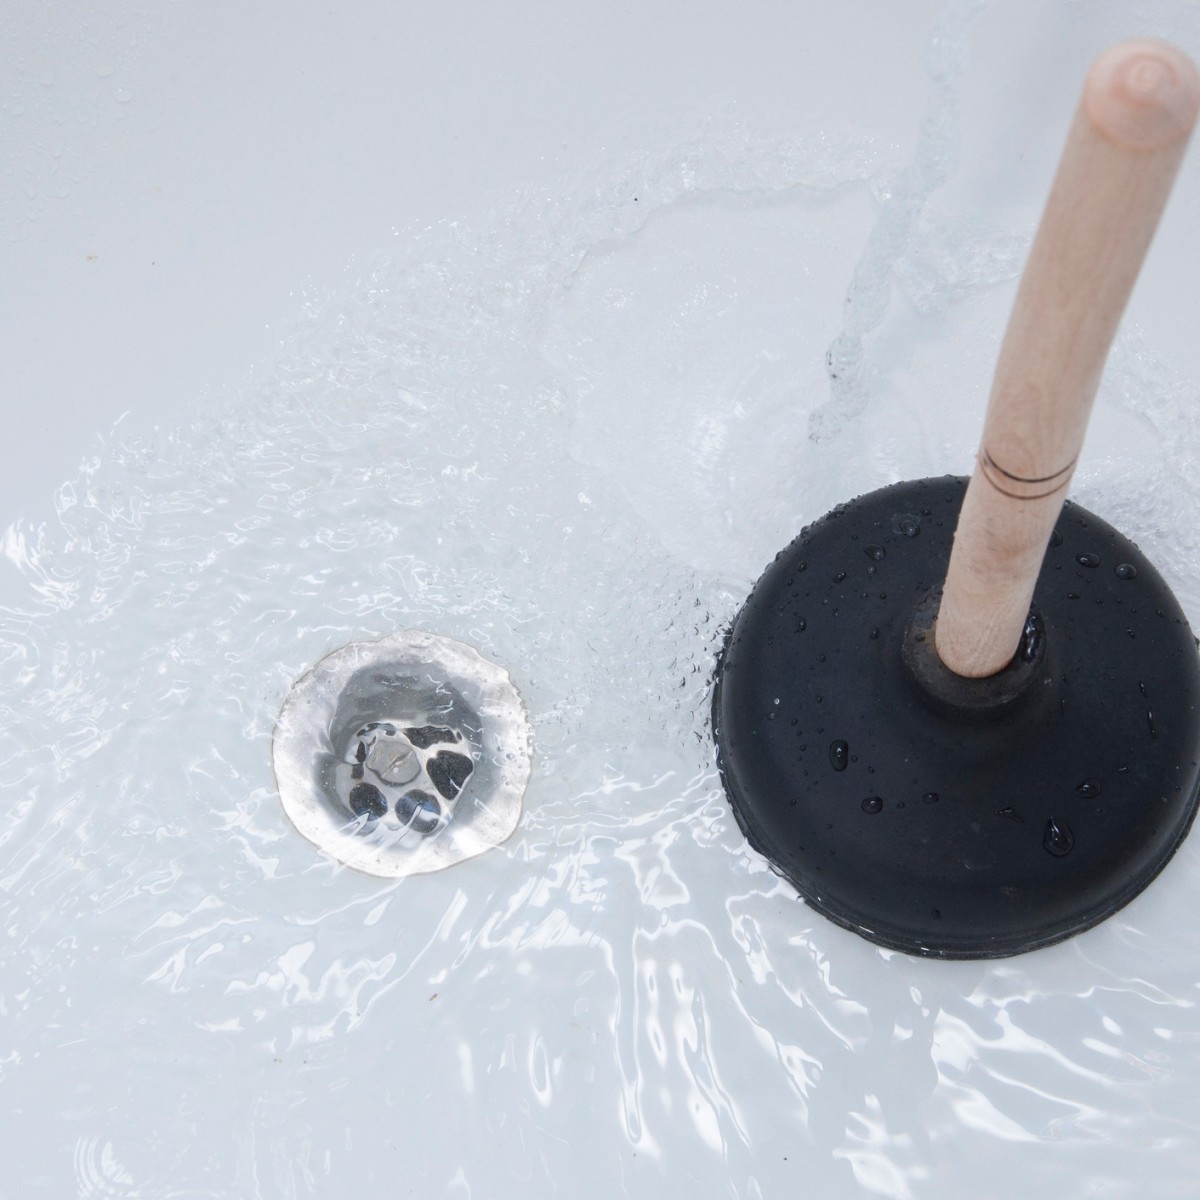 Clearing A Clogged Bathtub Drain, What To Use To Unclog A Bathtub